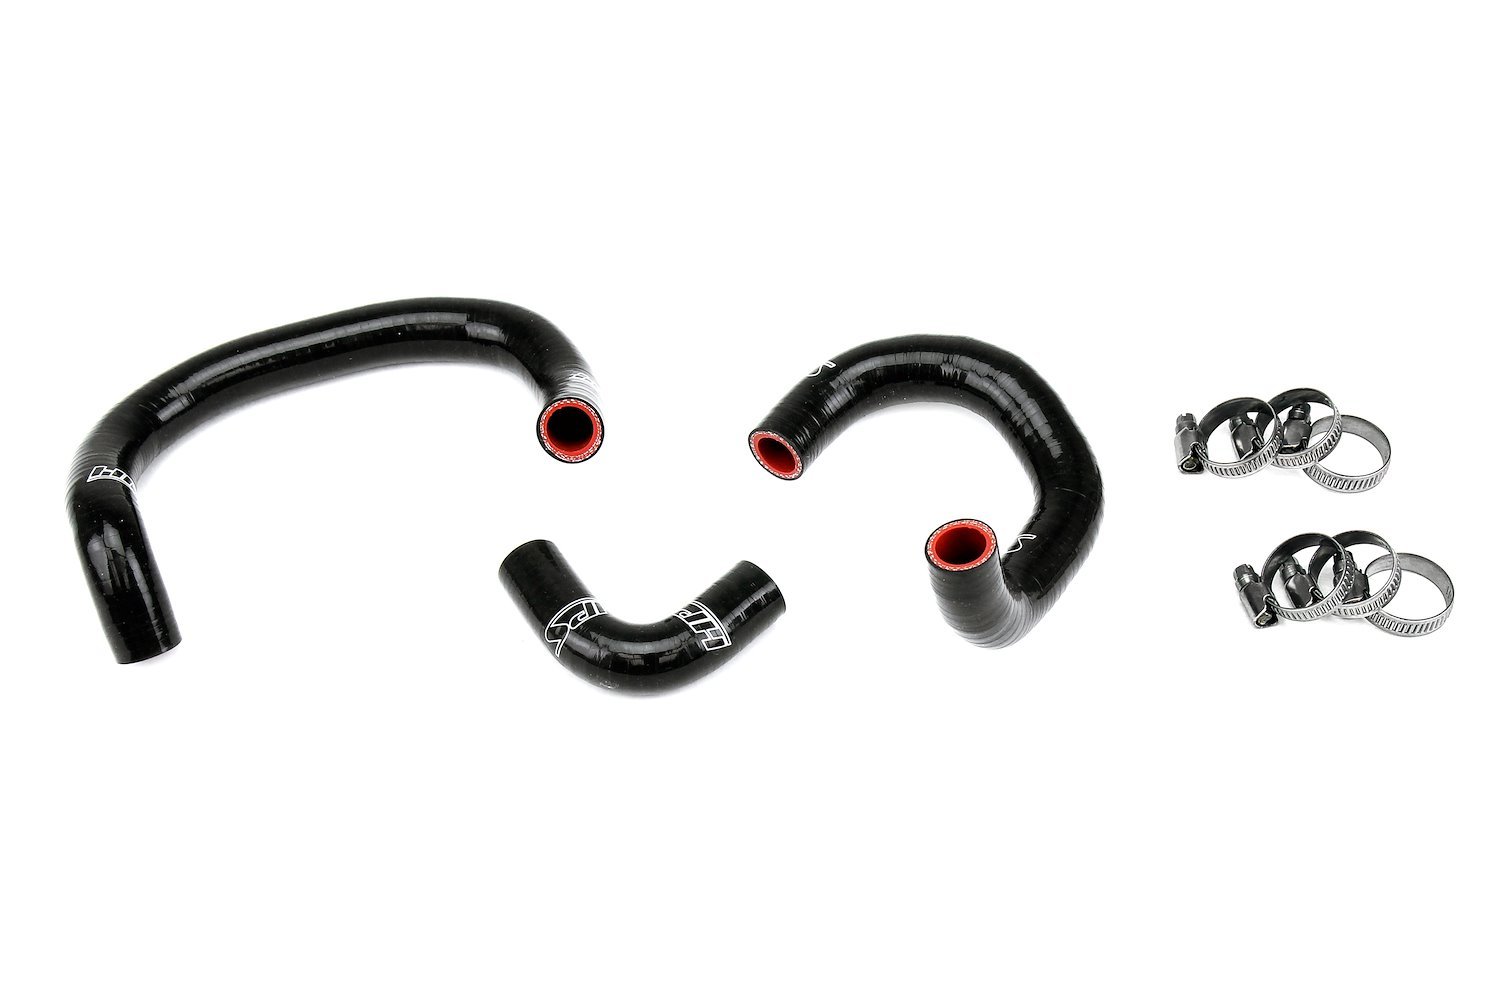 57-1927-BLK Heater Hose Kit, 3-Ply Reinforced Silicone, Replaces OEM Rubber Heater Coolant Hoses